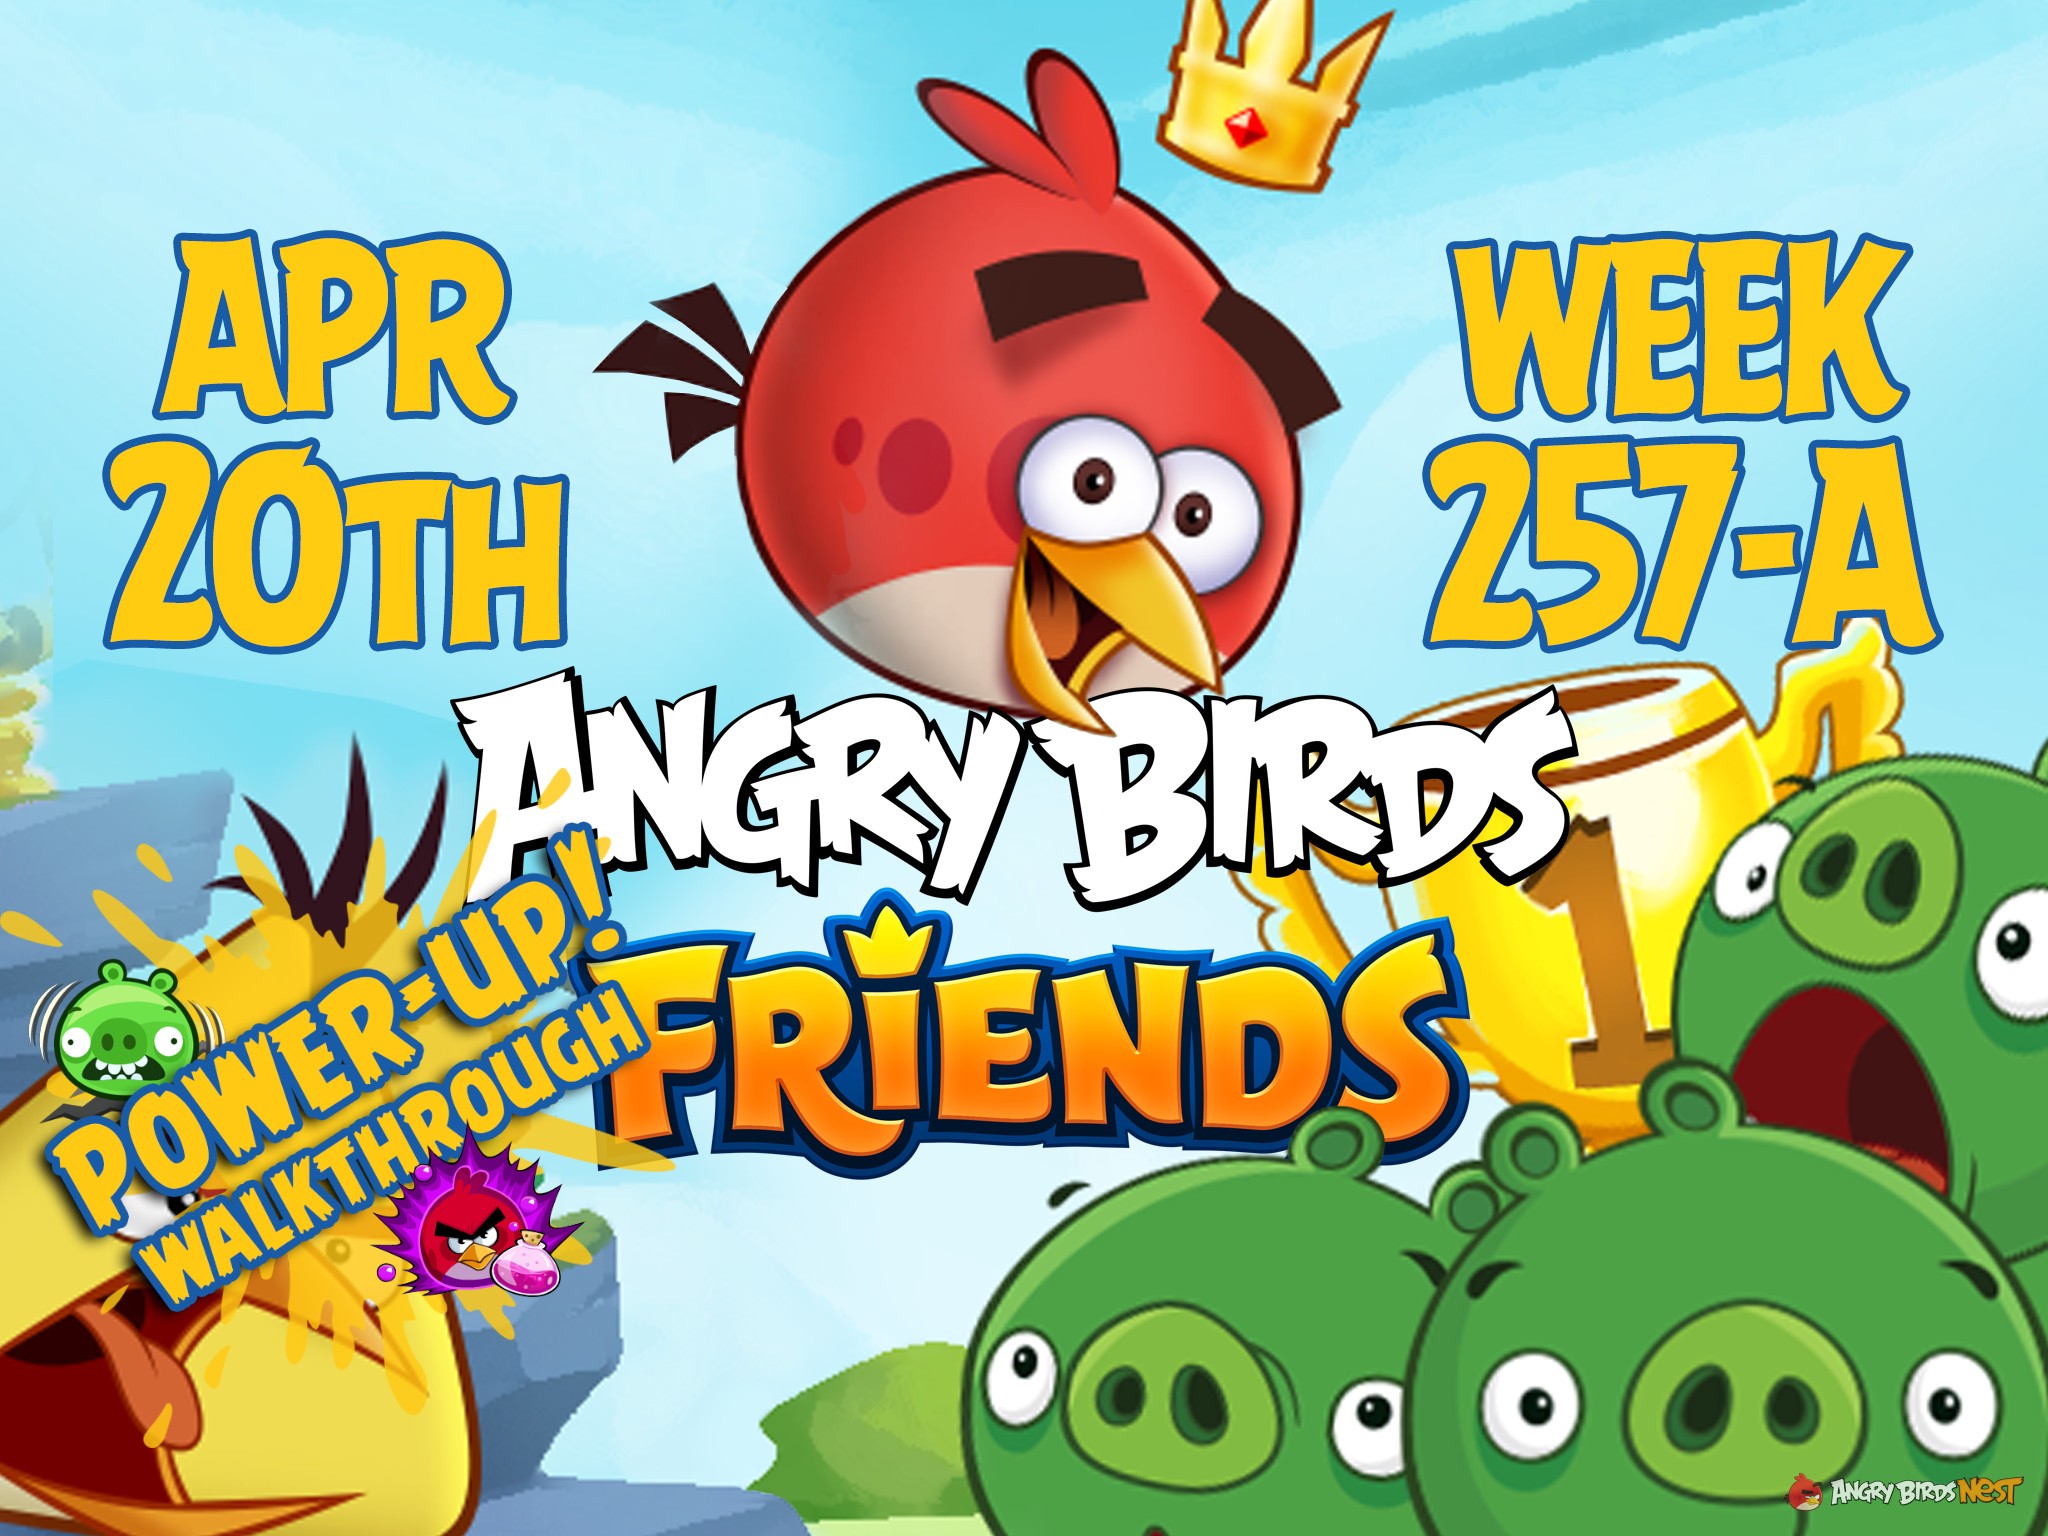 Angry Birds Friends Tournament Week 257-A Feature Image PU